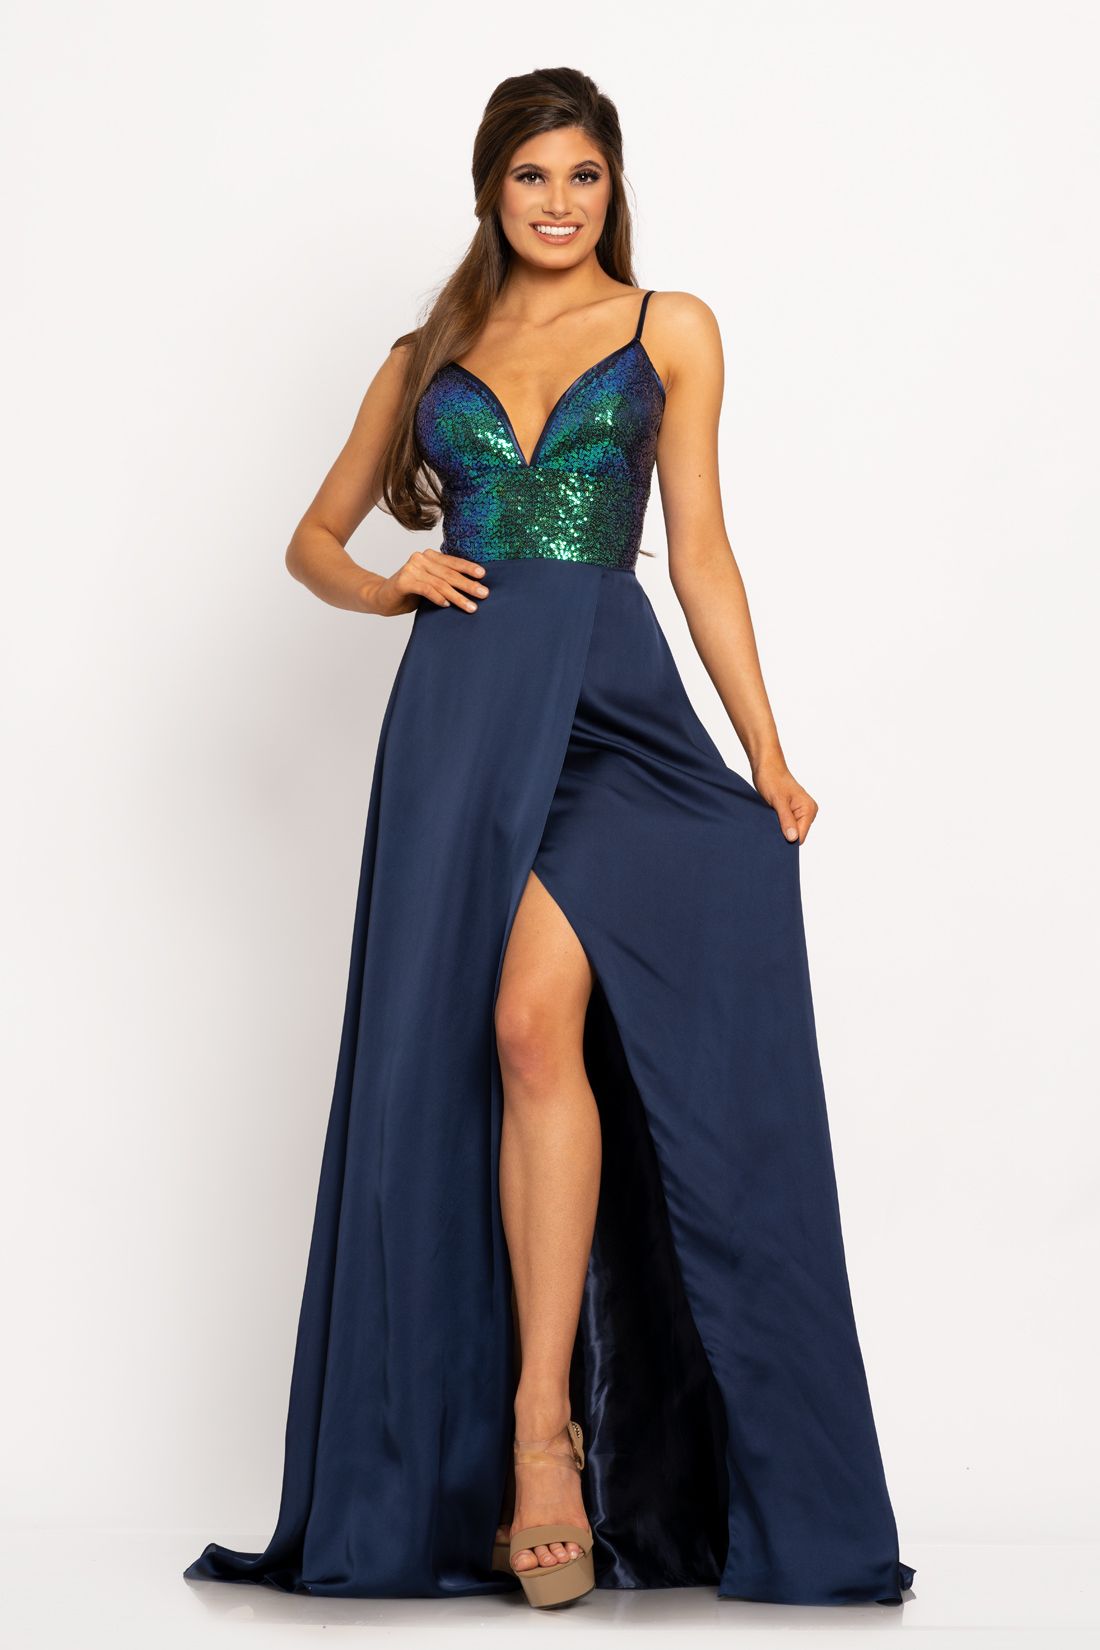 Johnathan Kayne 2214 Sequin bodice with a V neckline trimmed with charmeuse and spaghetti straps A line prom dress. The long charmeuse skirt on this pageant dress features a wrap style slit.   Colors Berry, Navy, Teal  Sizes  00, 0, 2, 4, 6, 8, 10, 12, 14, 16 